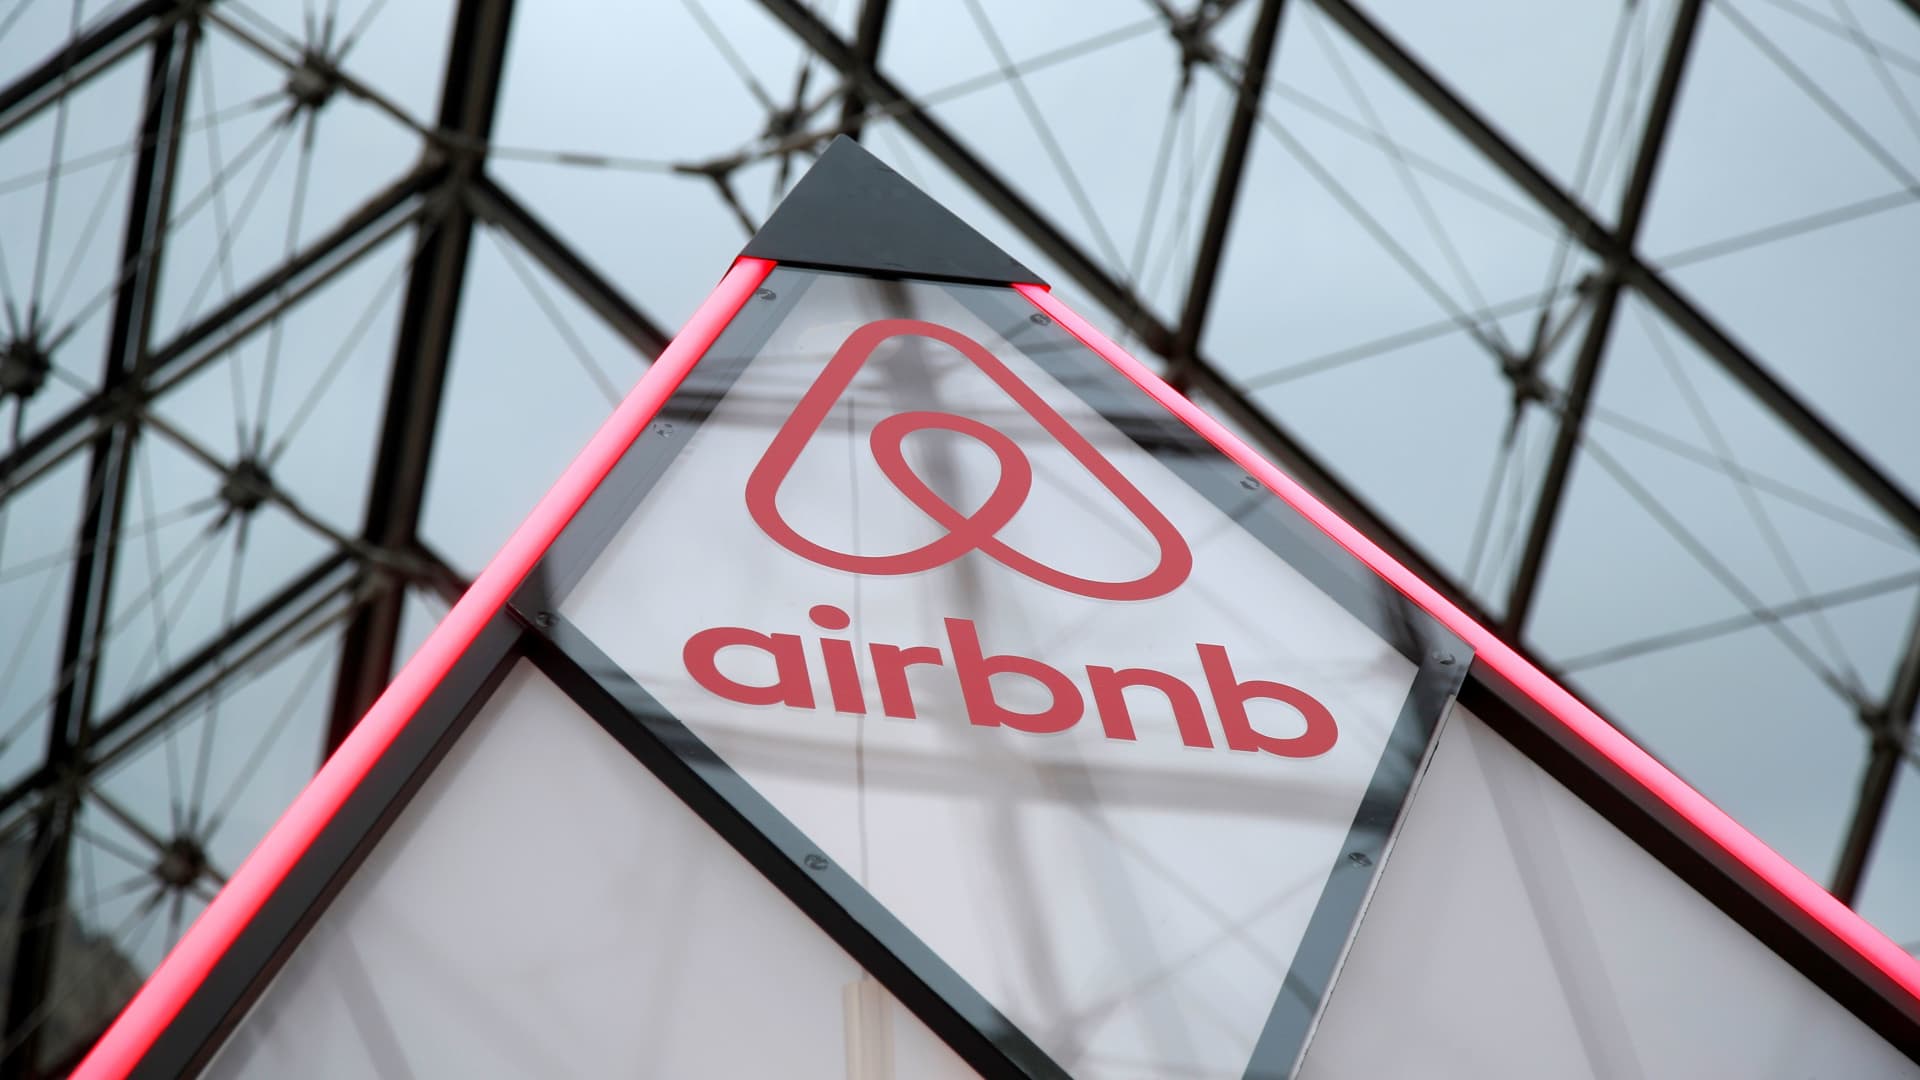 Airbnb launches platform allowing renters to host apartments, partnering with major landlords